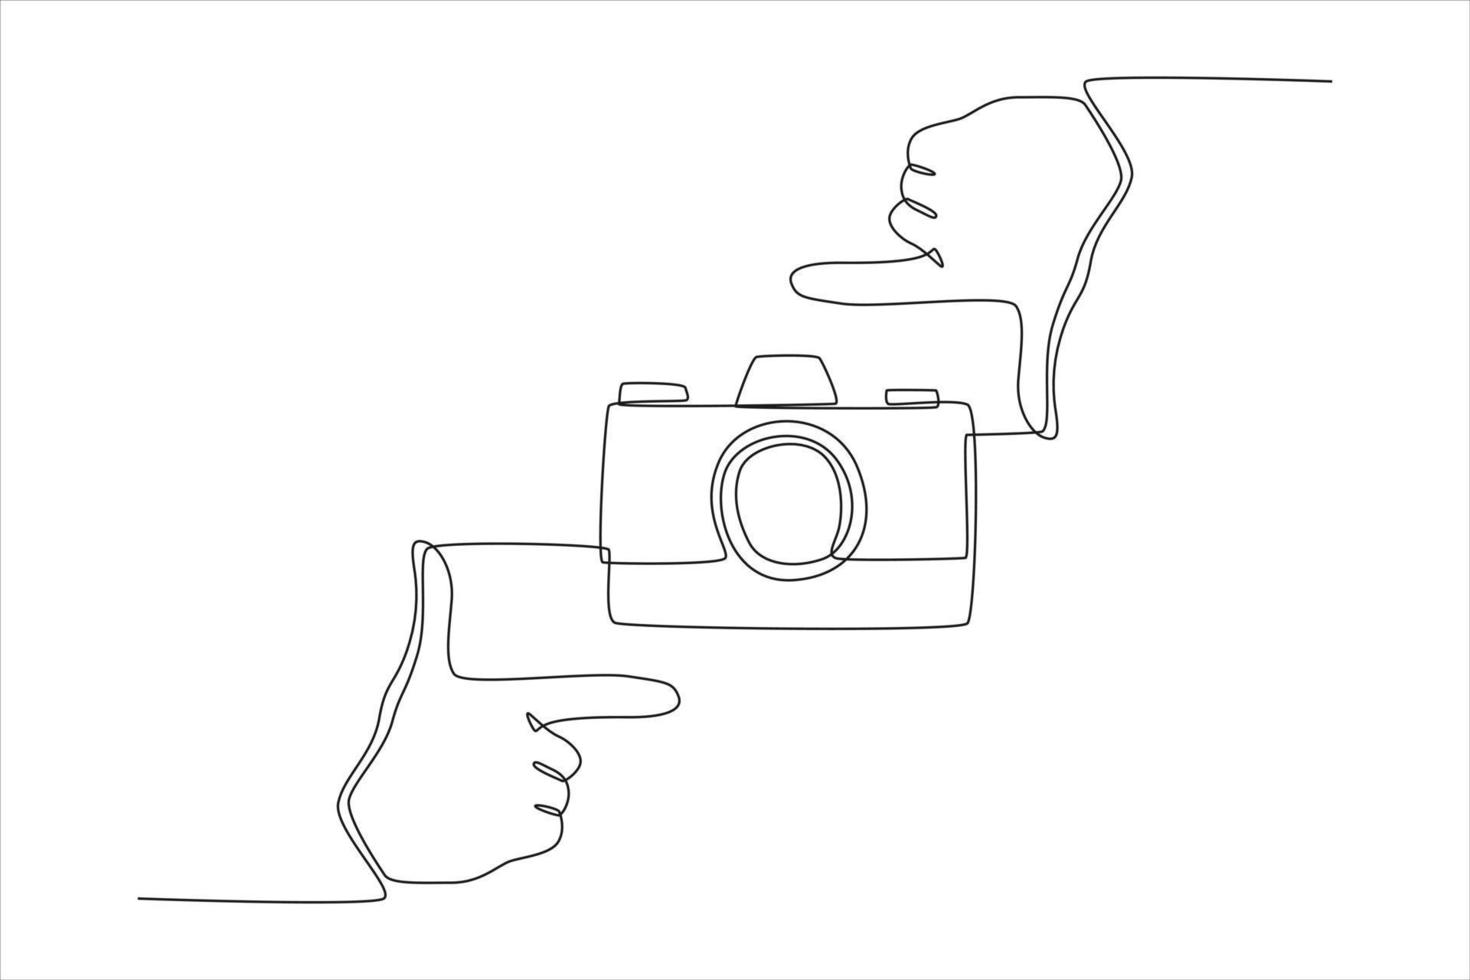 Continuous one line drawing forming a square with hands in front of camera. World photo day concept. Single line draw design vector graphic illustration.